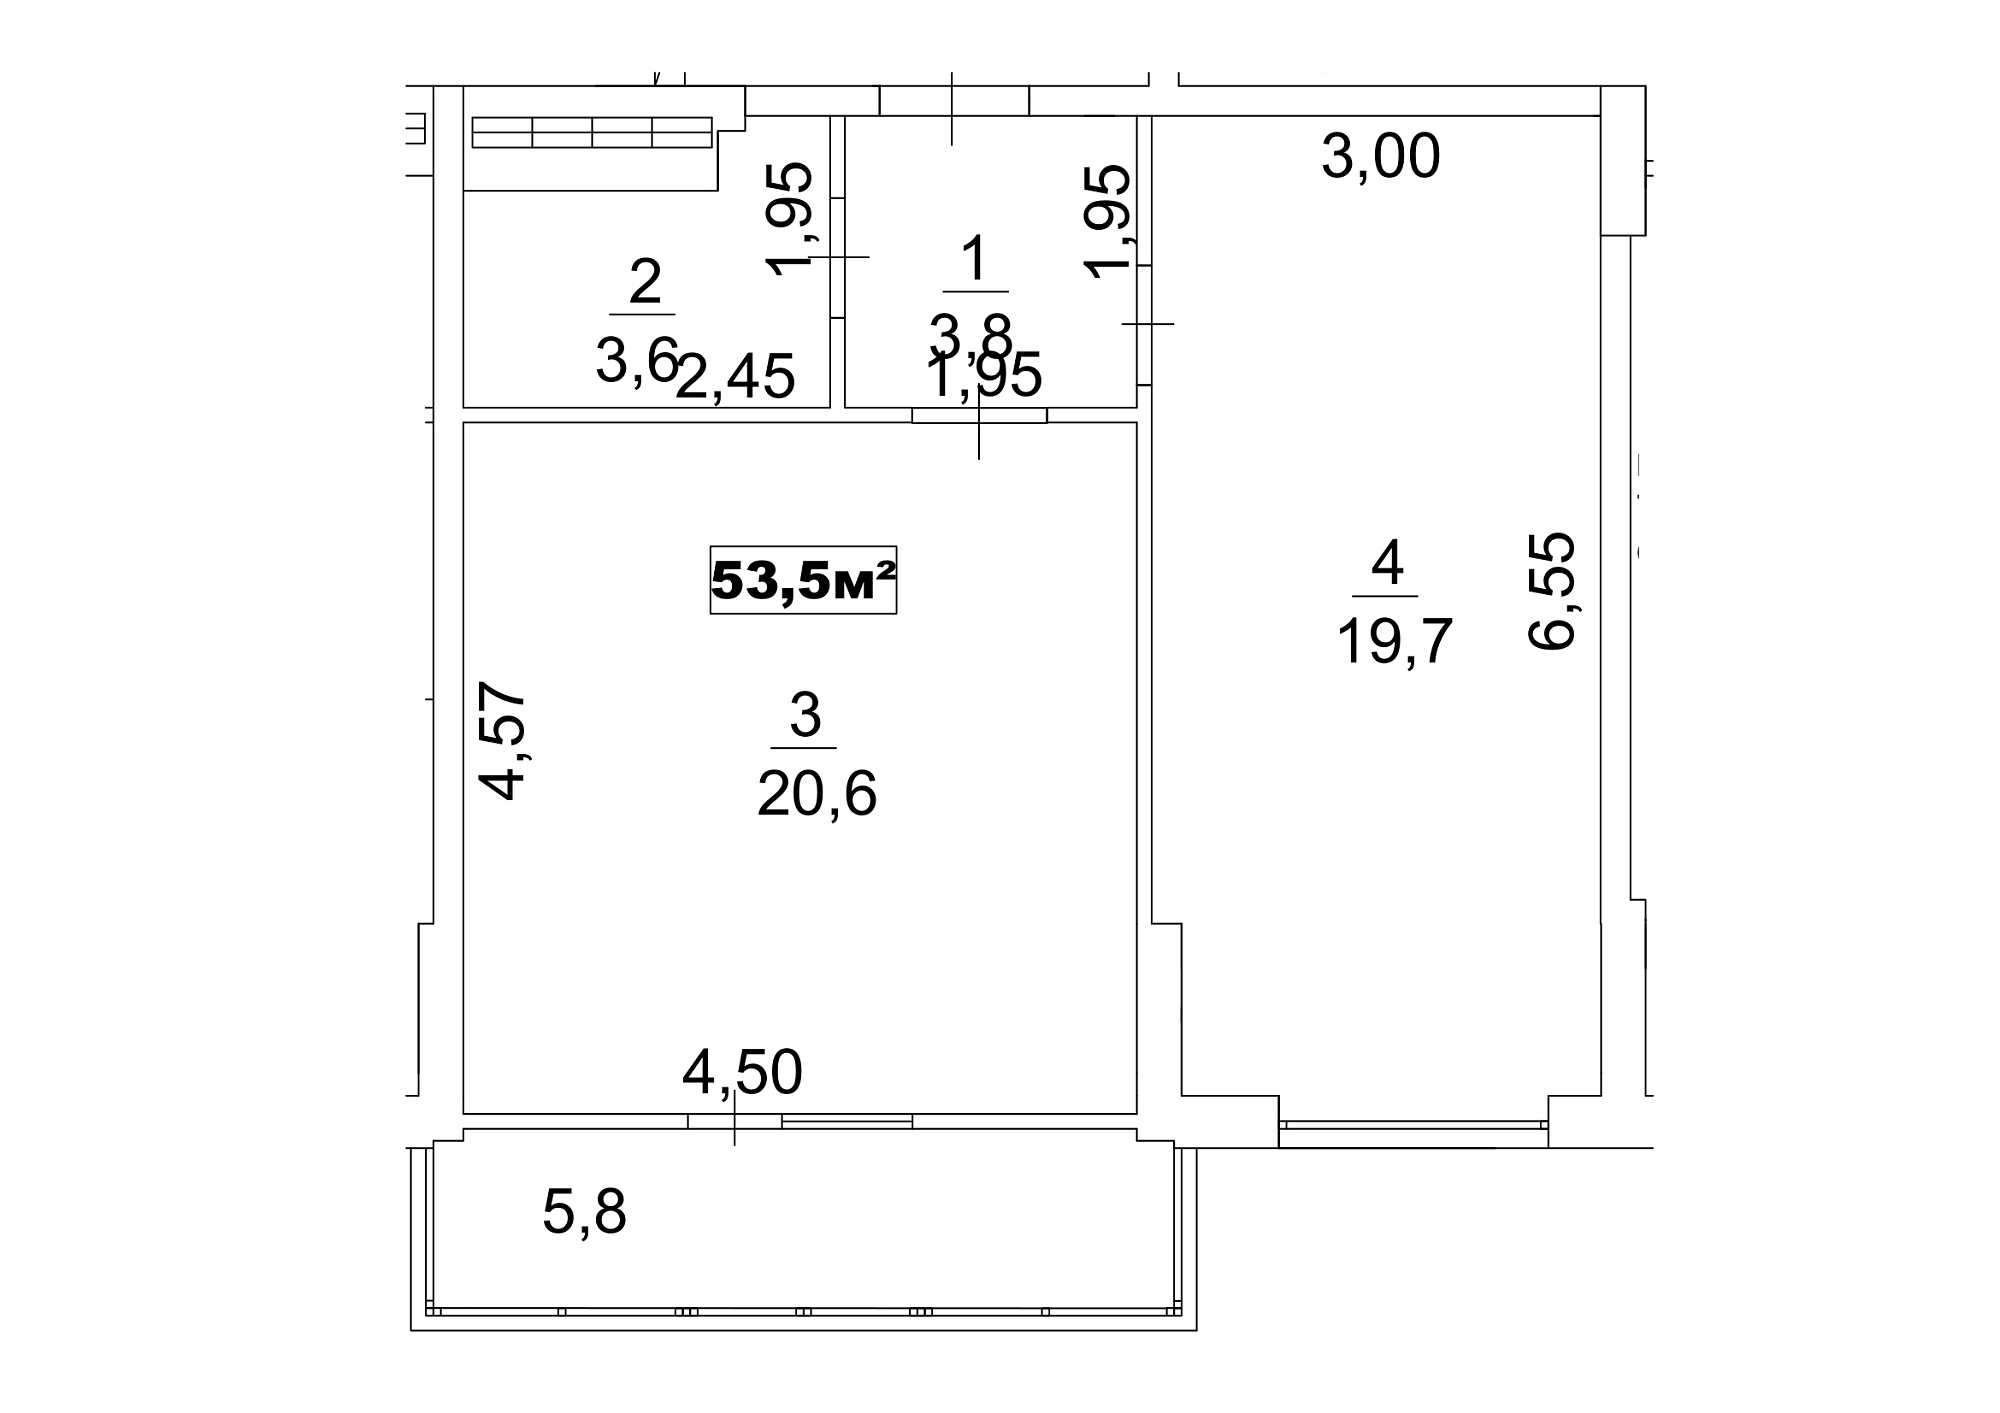 Planning 1-rm flats area 53.5m2, AB-13-01/00005.